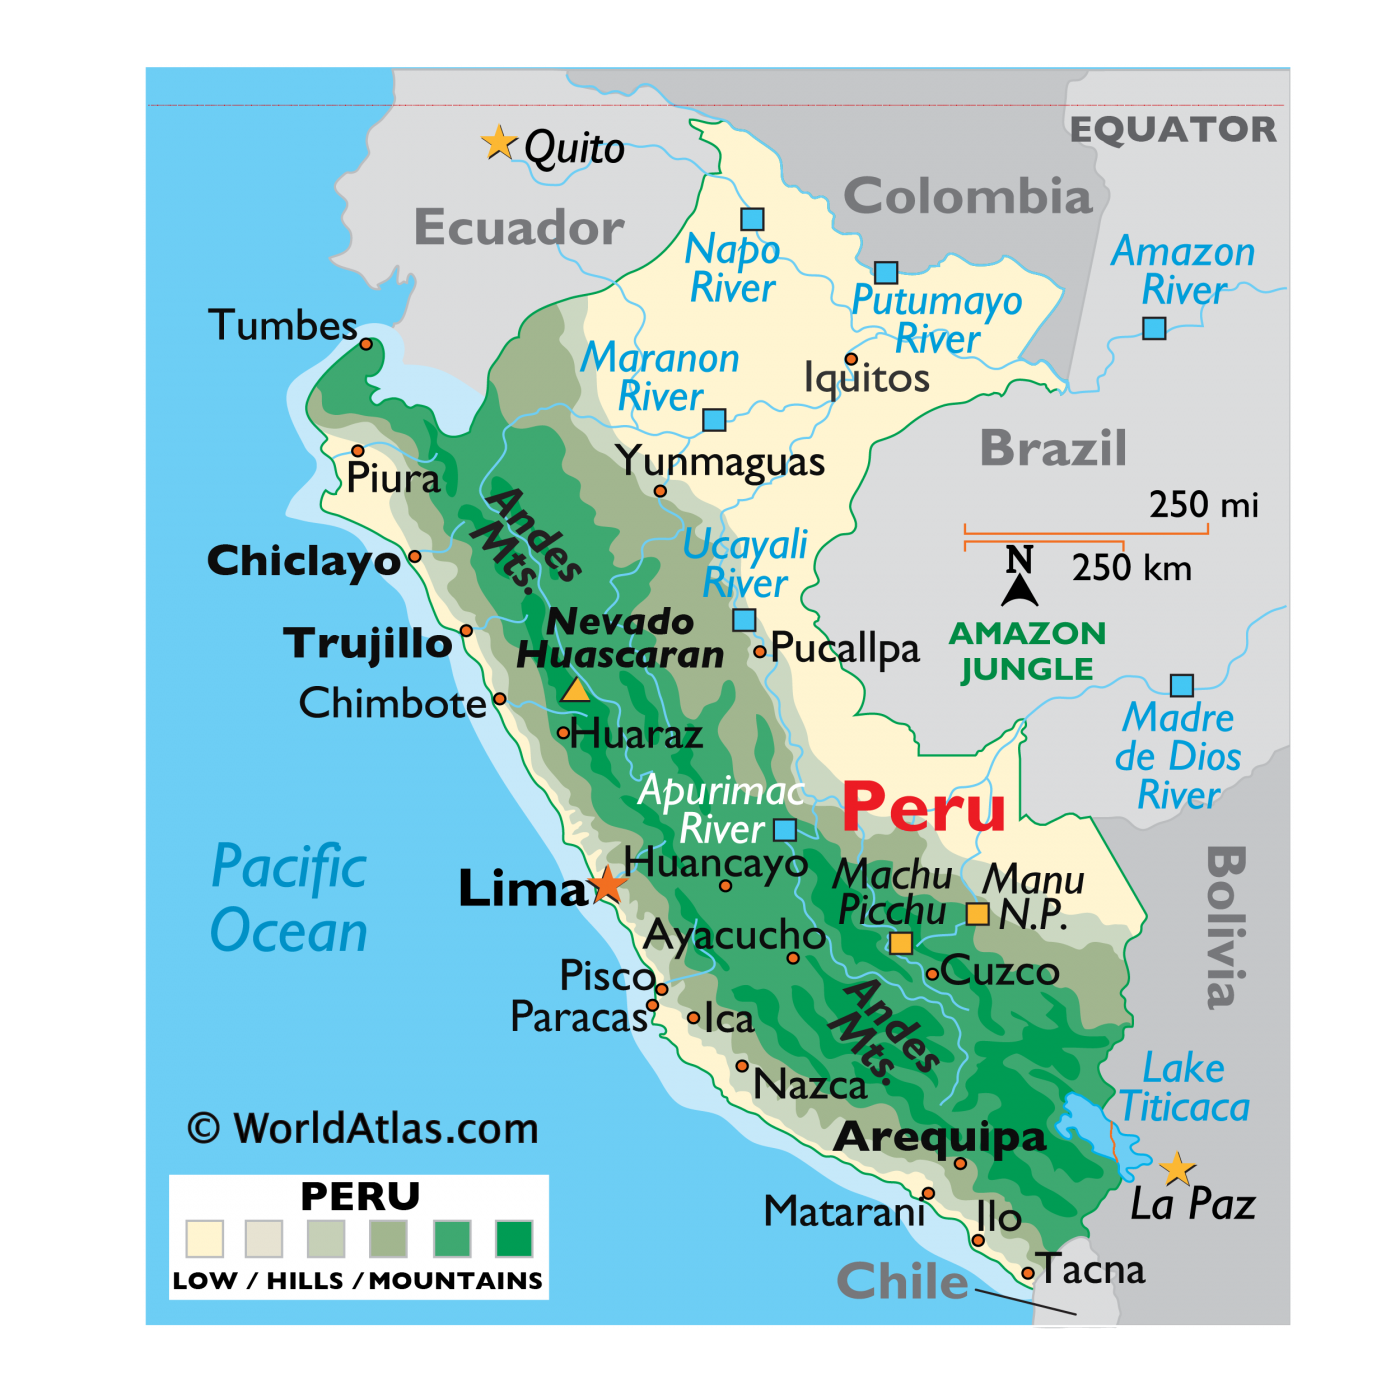 A map of Peru, showing the different regions of the country